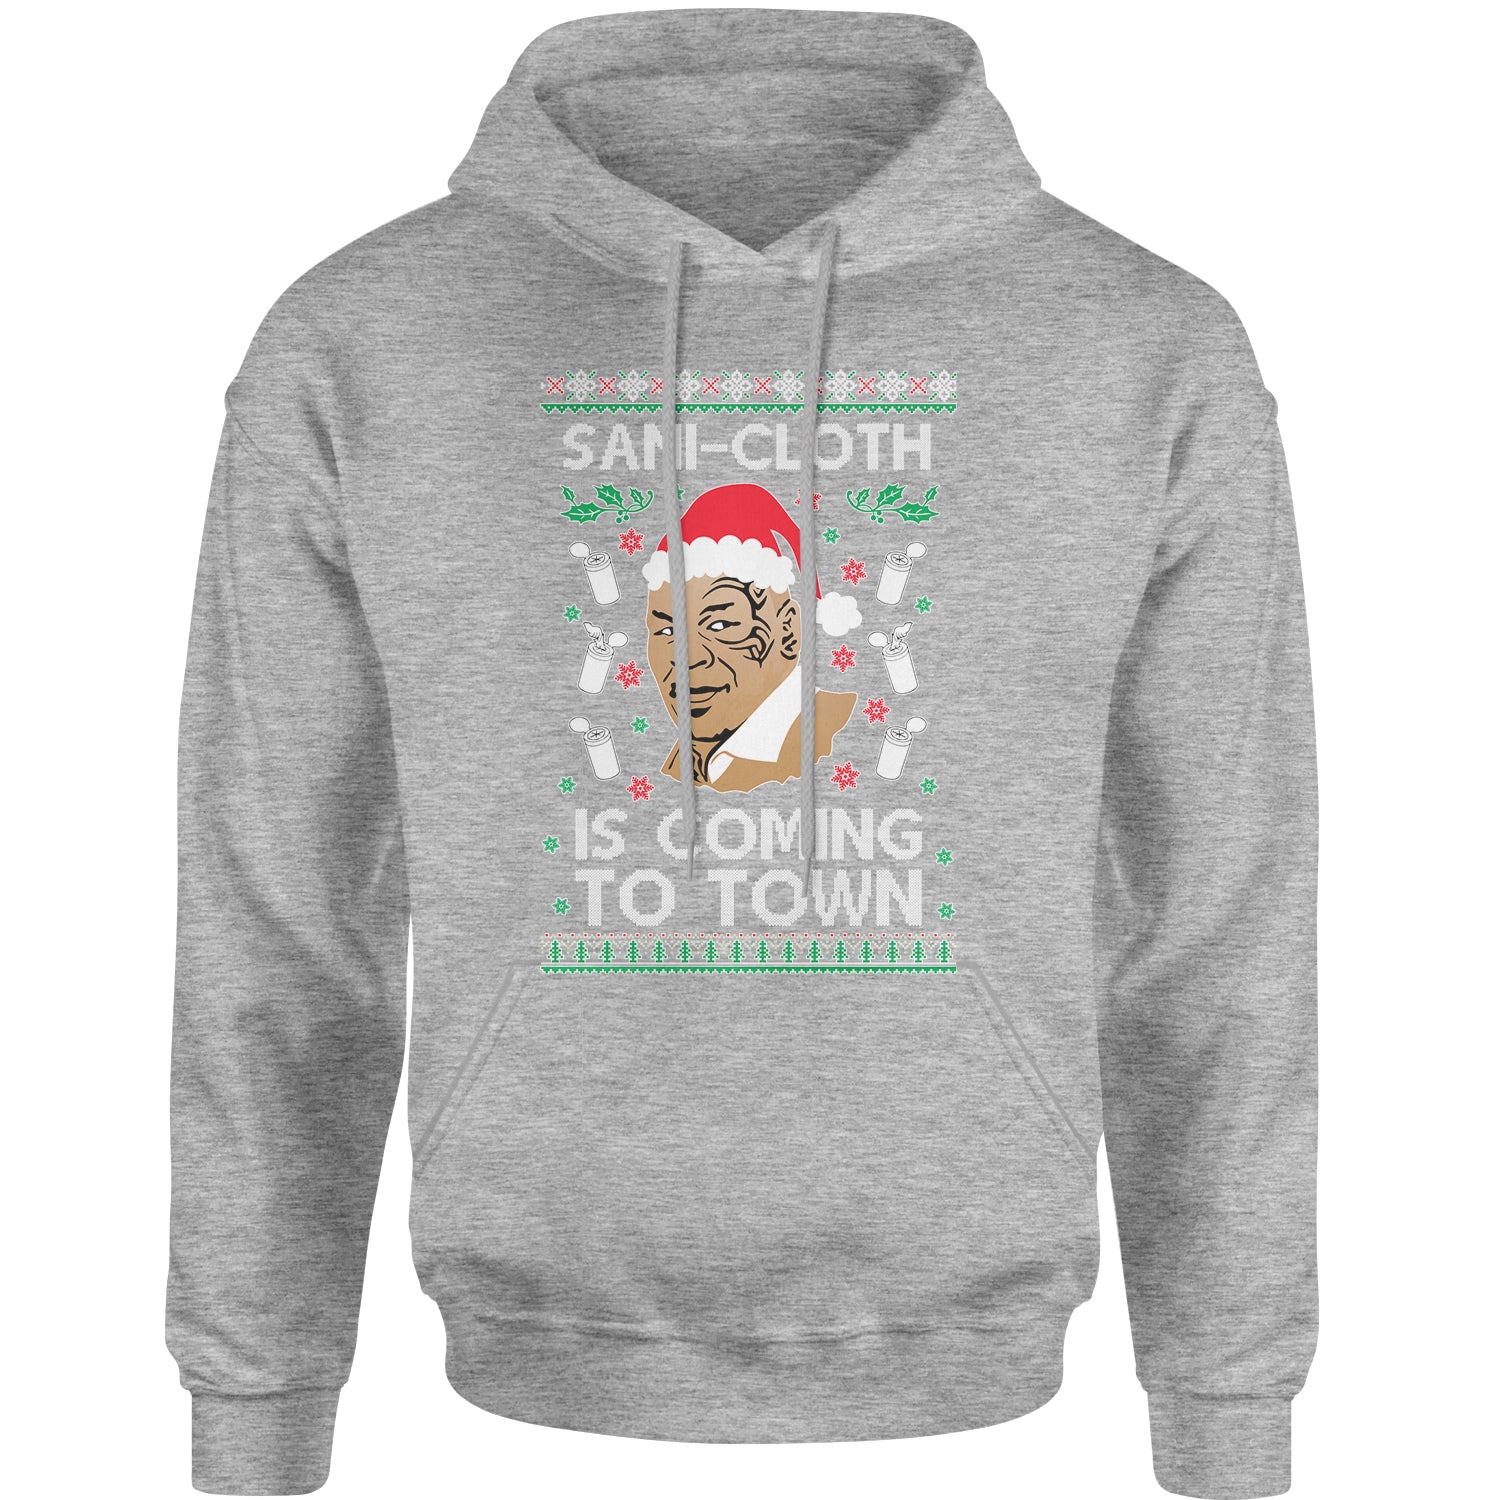 Sani-Cloth Is Coming To Town Ugly Christmas Adult Hoodie Sweatshirt 2021, mike, miketyson, tyson by Expression Tees